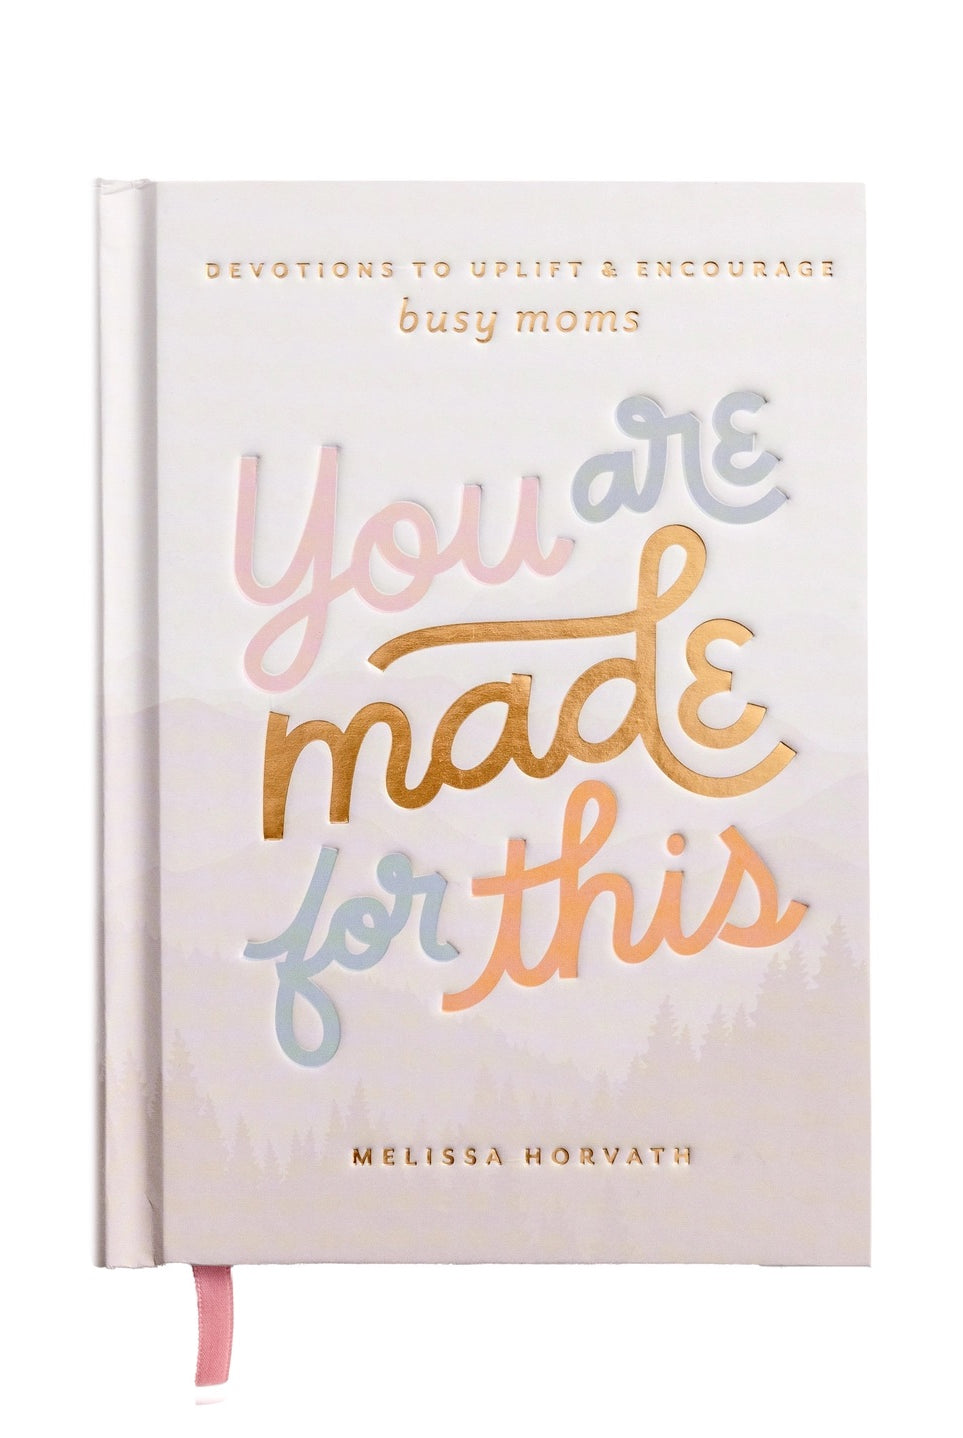 You are Made for This - A Devotional For Busy Moms-The Lovely Closet-The Lovely Closet, Women's Fashion Boutique in Alexandria, KY